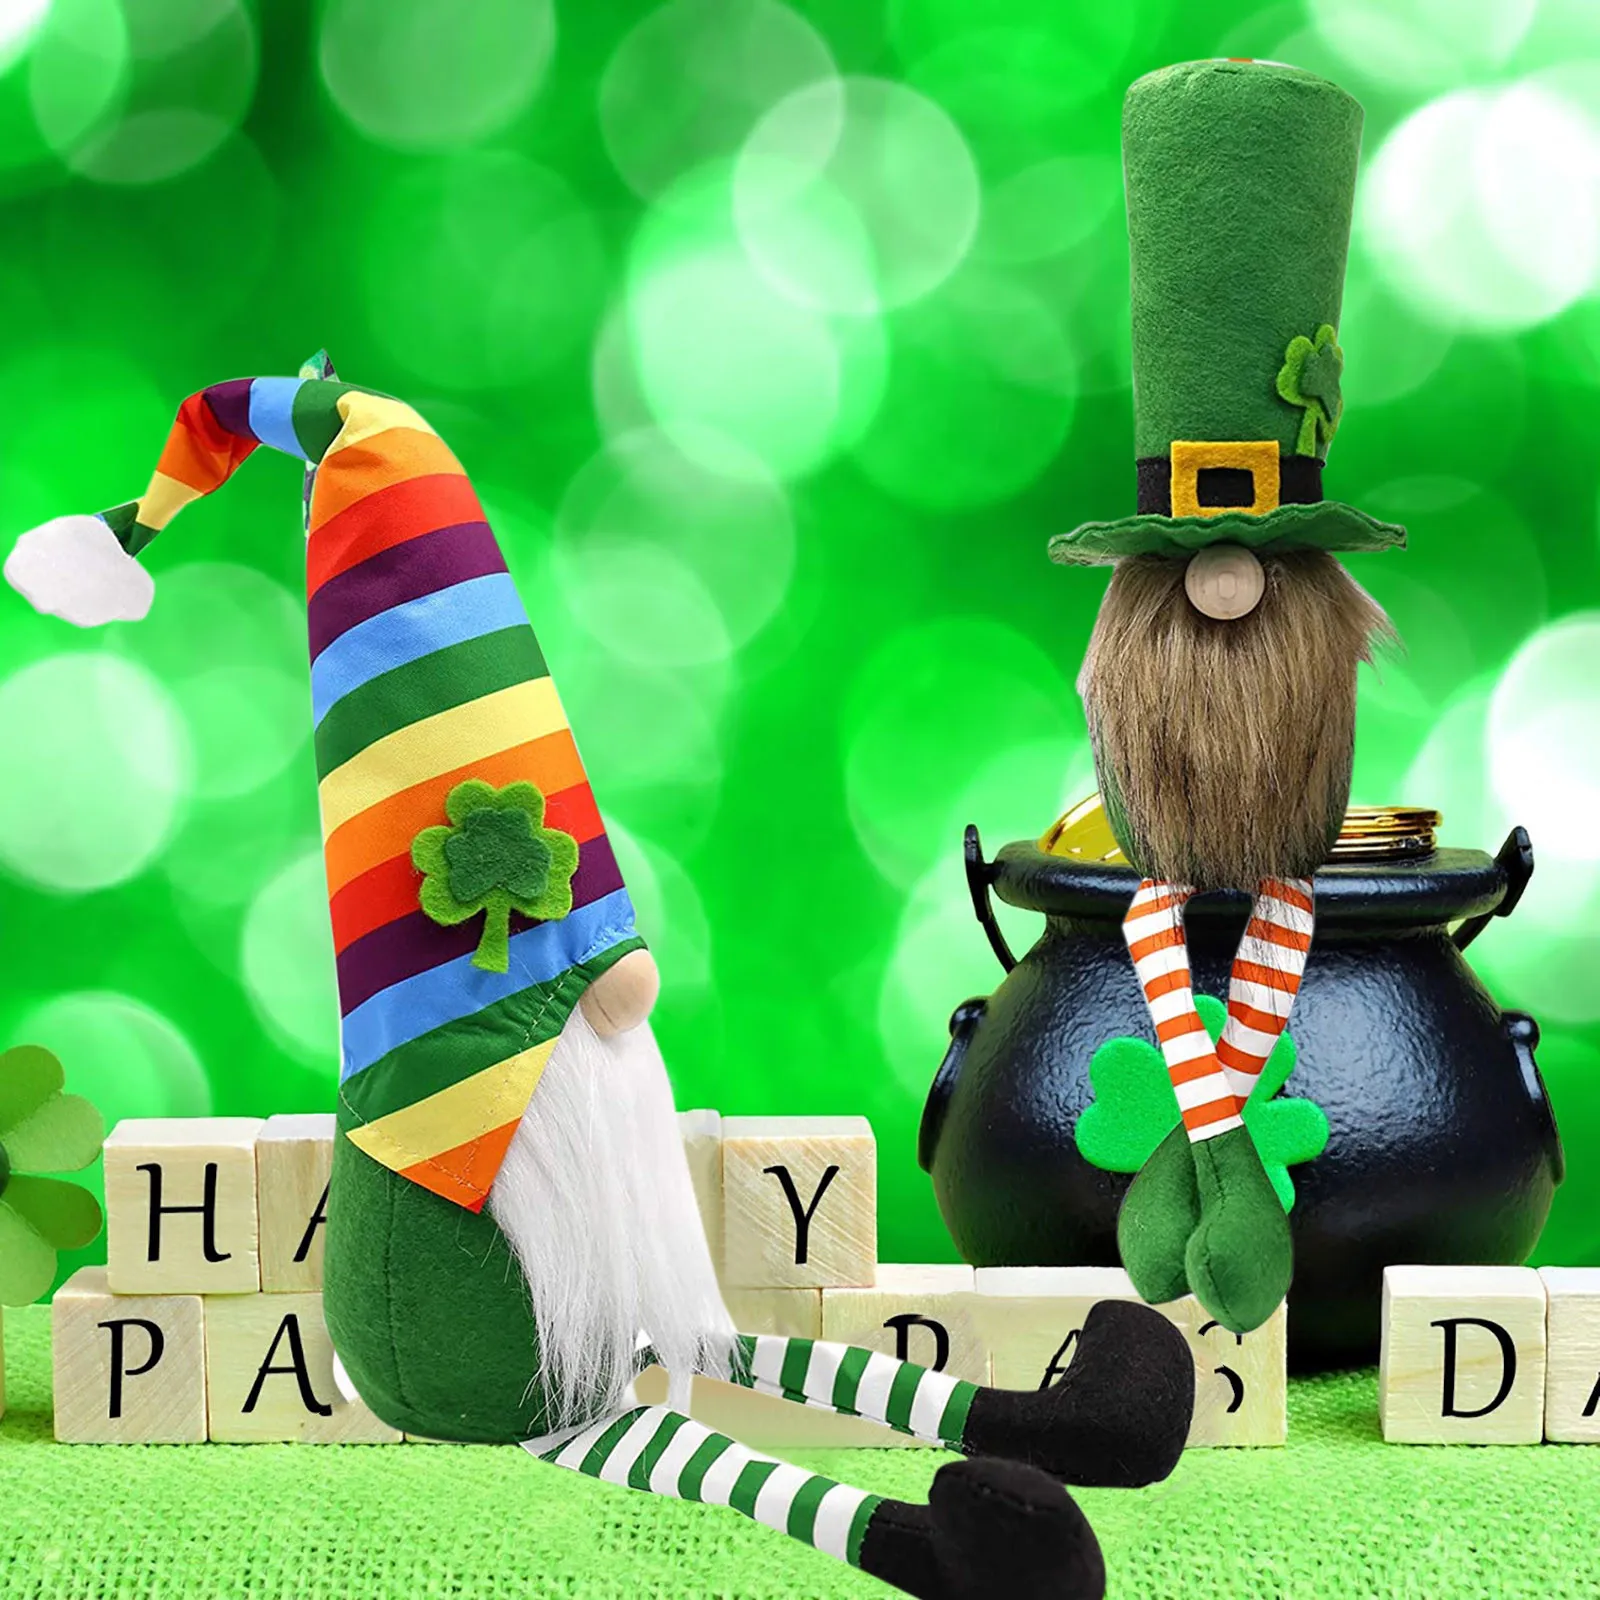 

2pc St Patricks Day Tomte Gnome Room Decor Irish Lucky Elf Plushie Bring Good Luck Perfect Gift For Family Wielkanoc Dekoracje